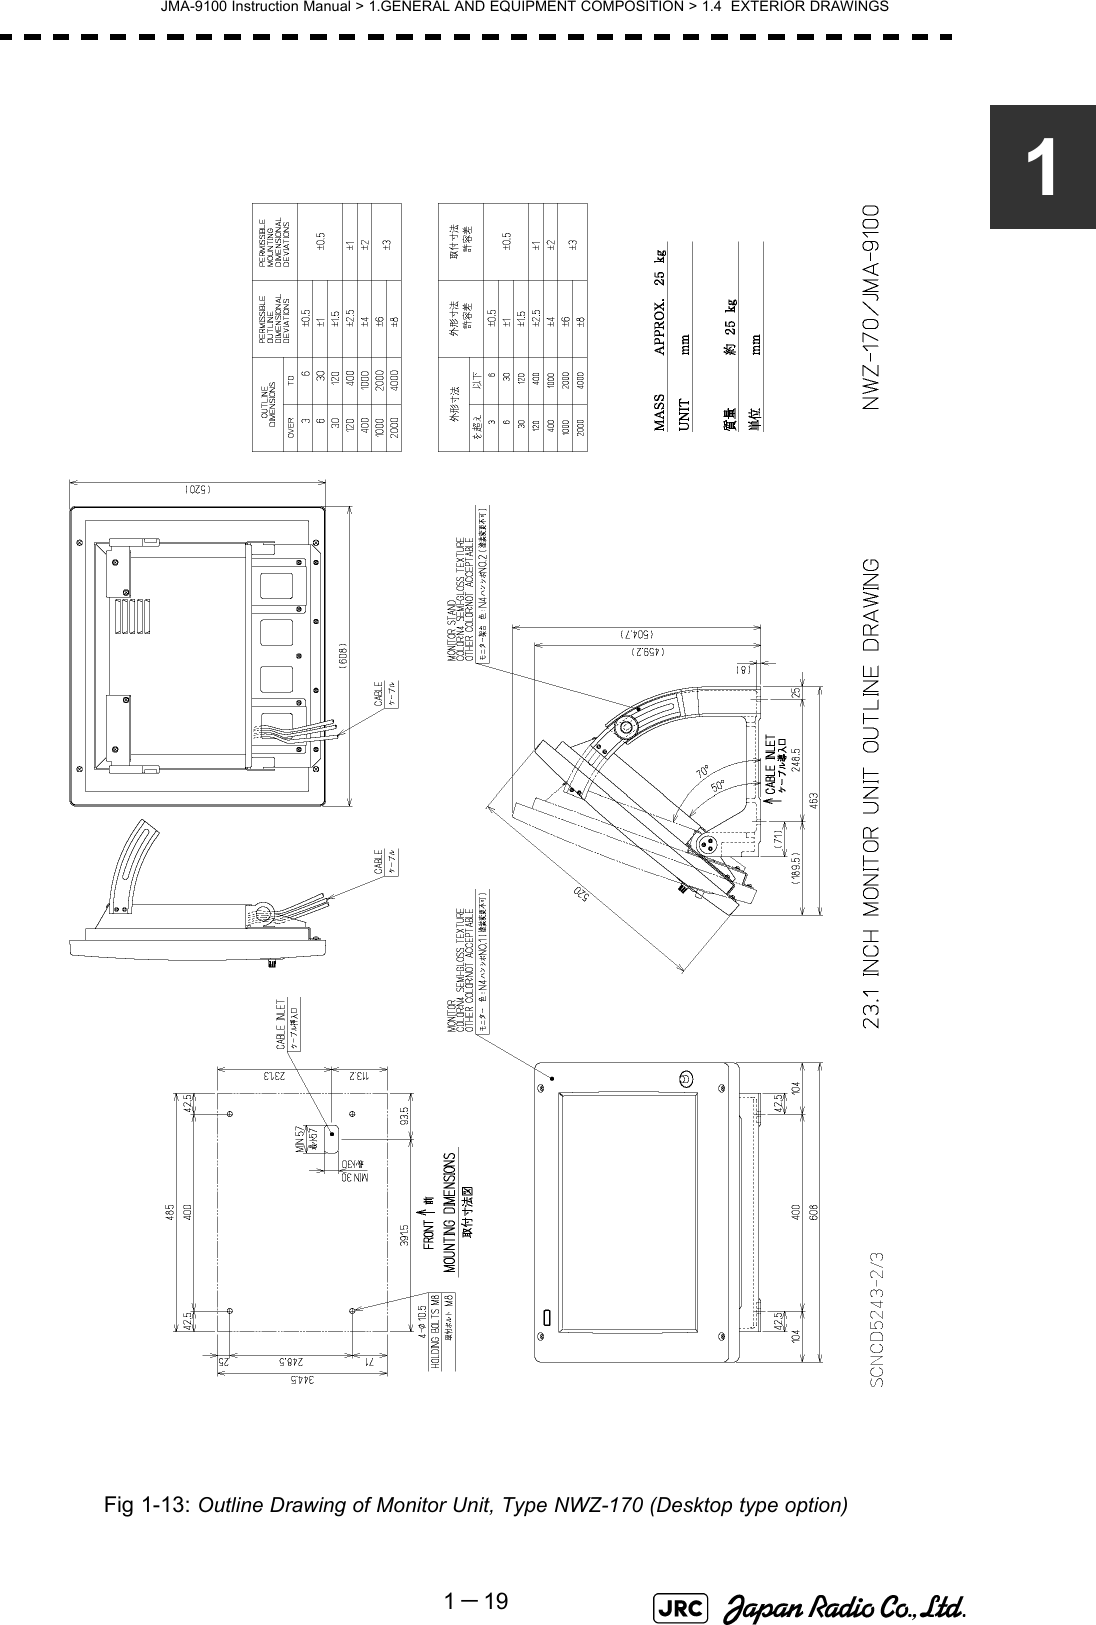 JMA-9100 Instruction Manual &gt; 1.GENERAL AND EQUIPMENT COMPOSITION &gt; 1.4  EXTERIOR DRAWINGS1－191Fig 1-13: Outline Drawing of Monitor Unit, Type NWZ-170 (Desktop type option)